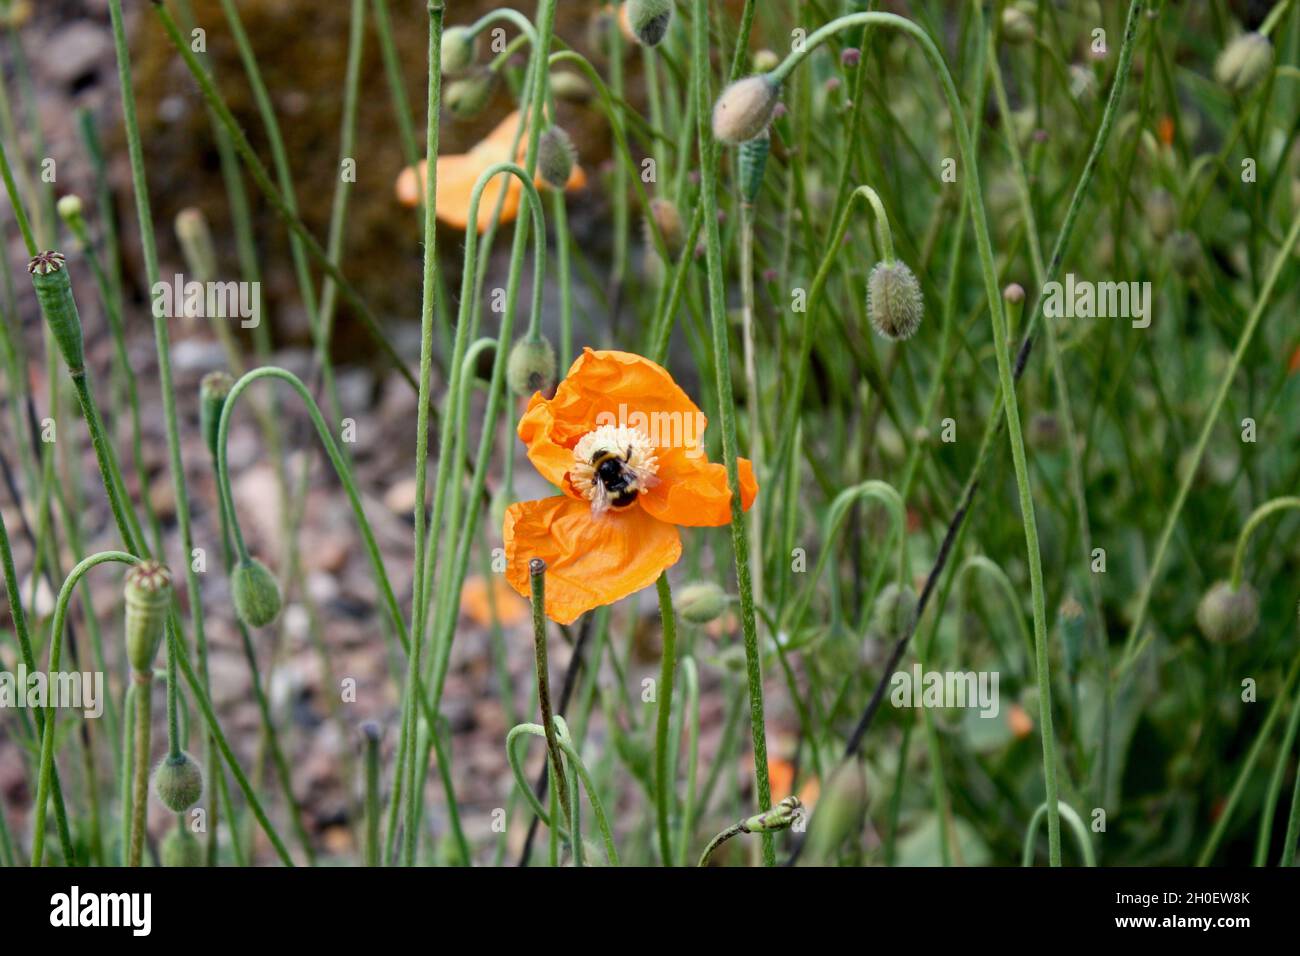 A bumble bee rests on an orange poppy. Stock Photo